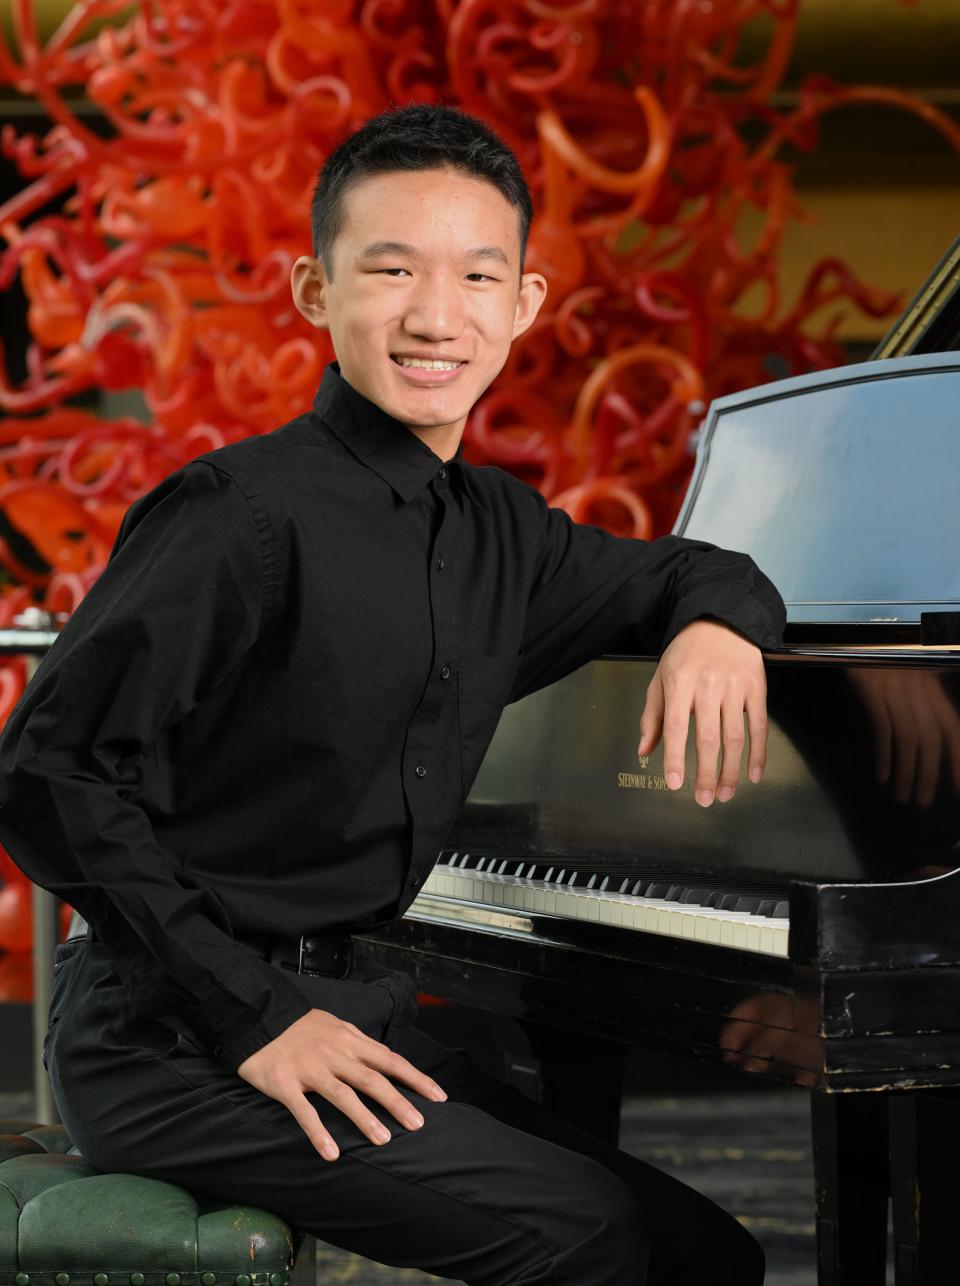 Alvin Gao, pianist, poses for photos for the 2023 Salute to Youth Portraits at Abravanel Hall in Salt Lake City on Wednesday, Oct. 4, 2023. | Scott G Winterton, Deseret News